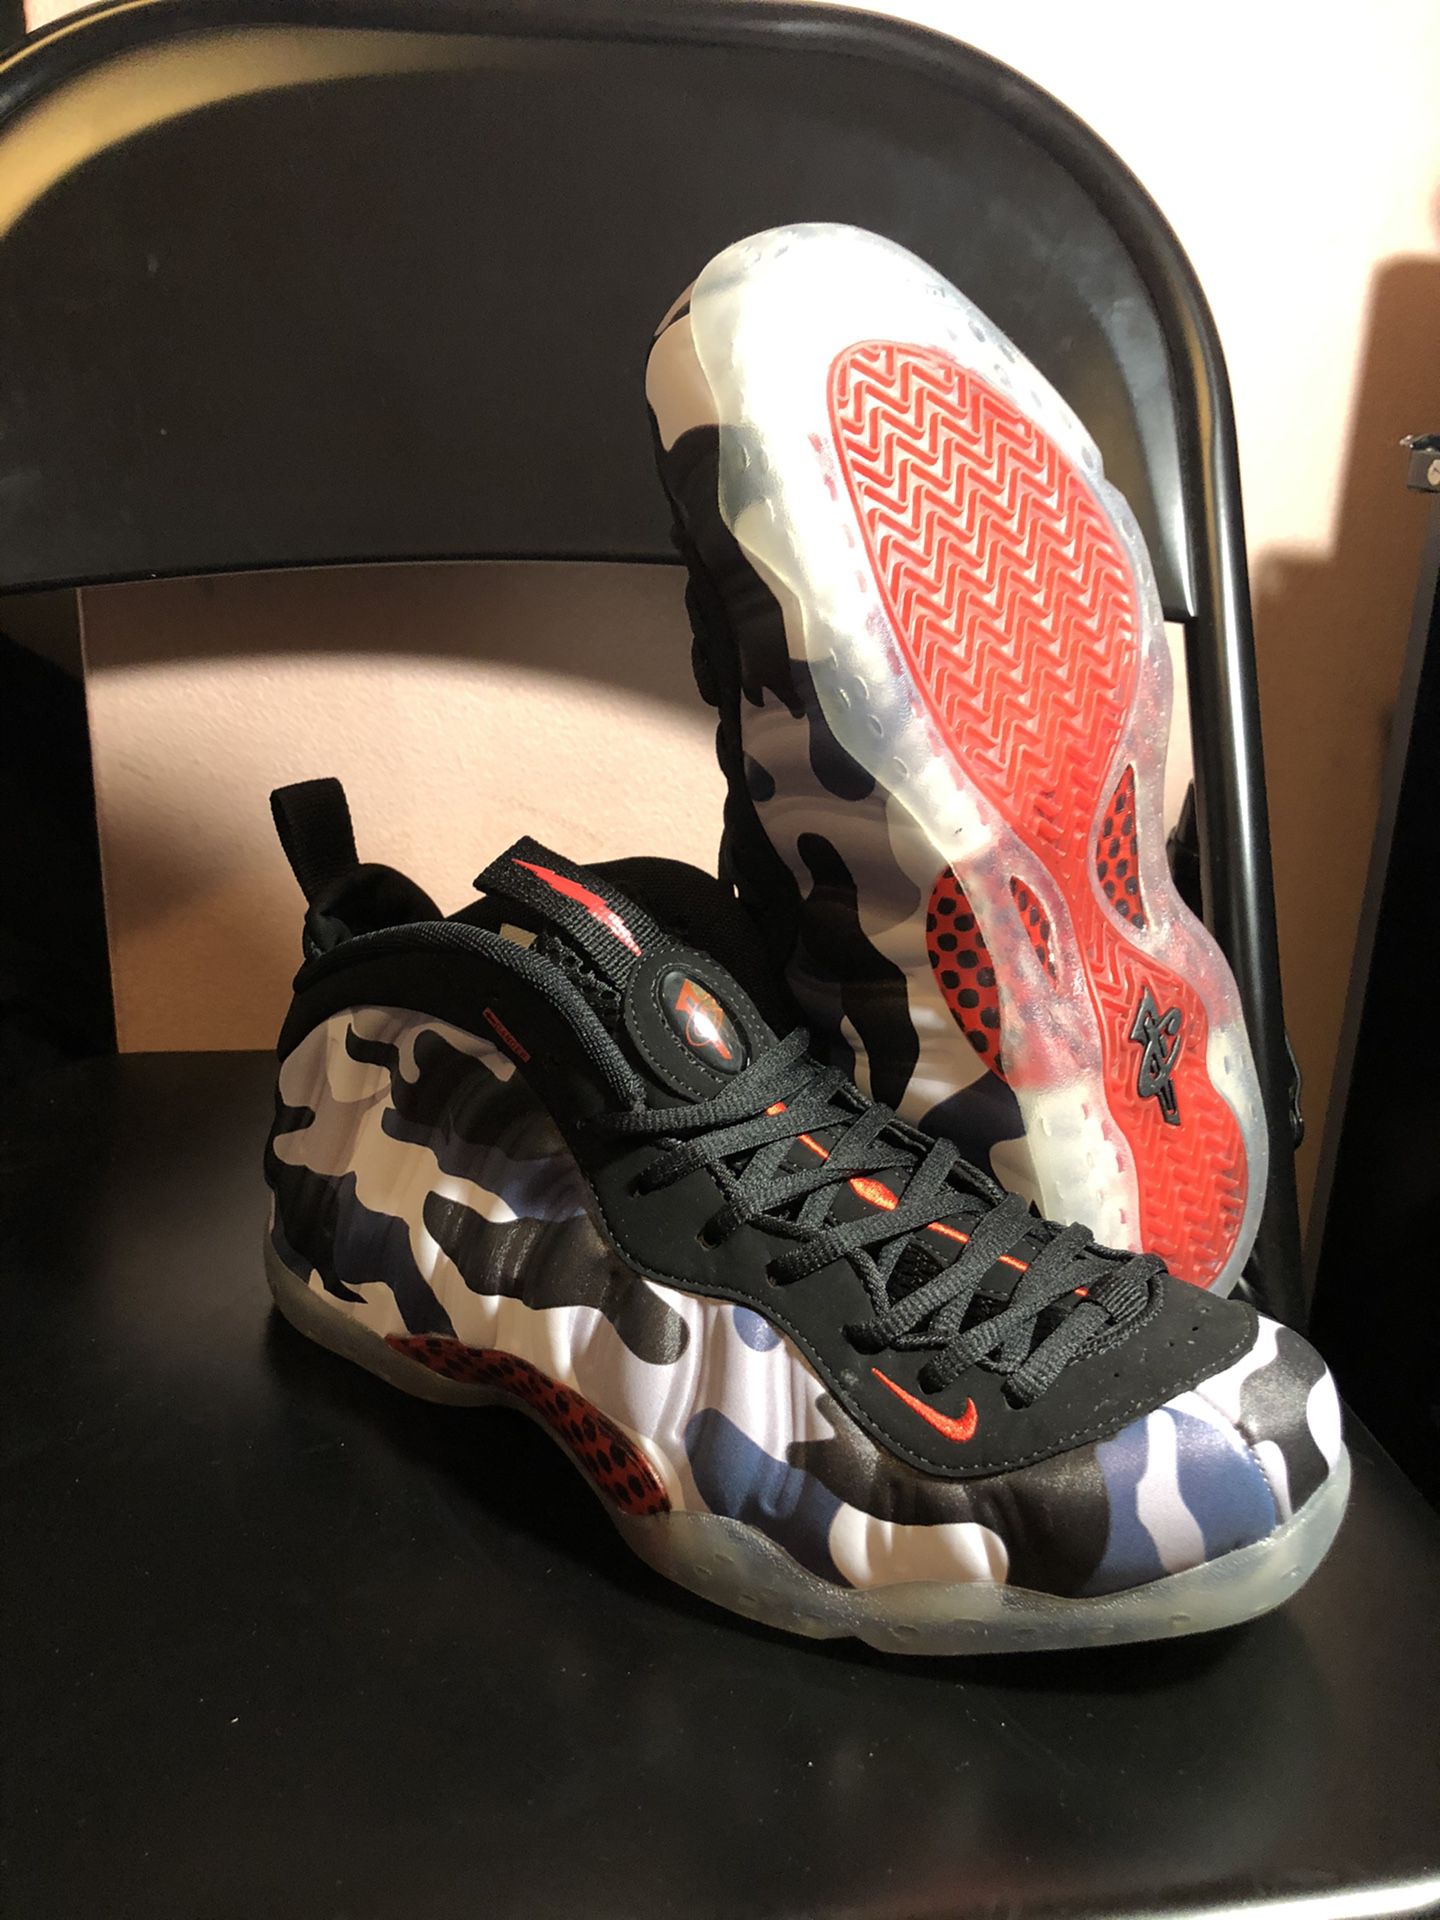 Nike Air Foamposite One Fighter Jet Size 9.5